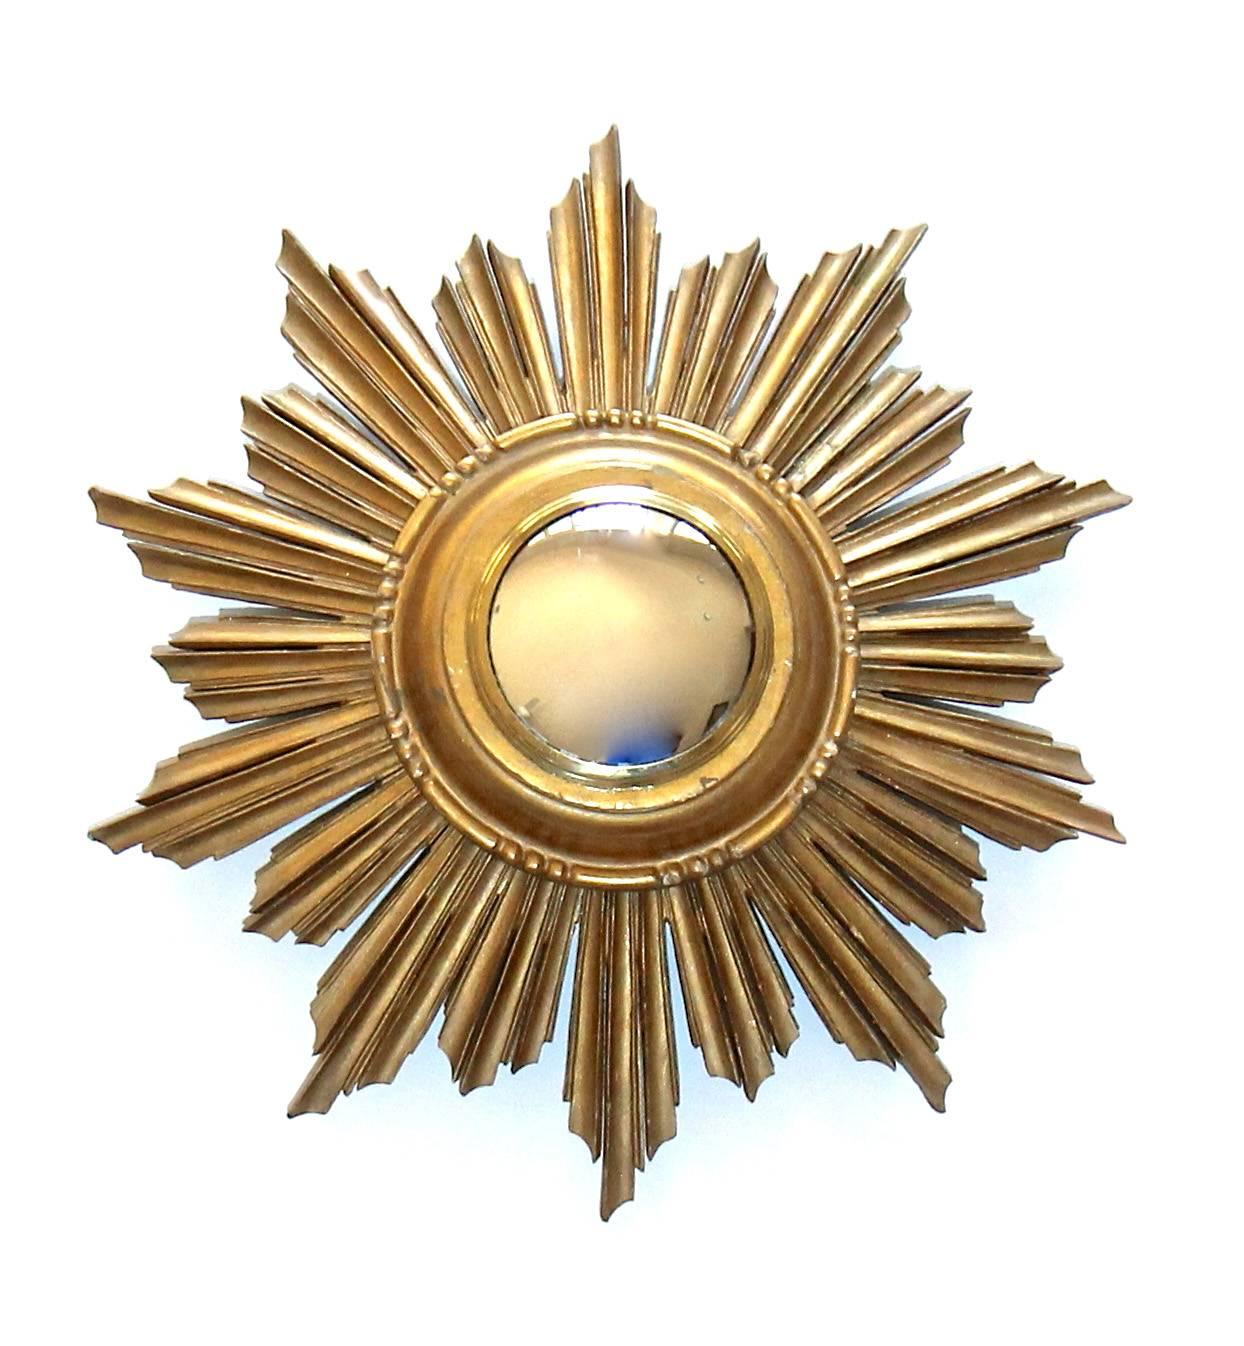 French made 1940s sunburst or starburst carved giltwood wall mirror with inset convex mirror. Diameter of mirror 3.5